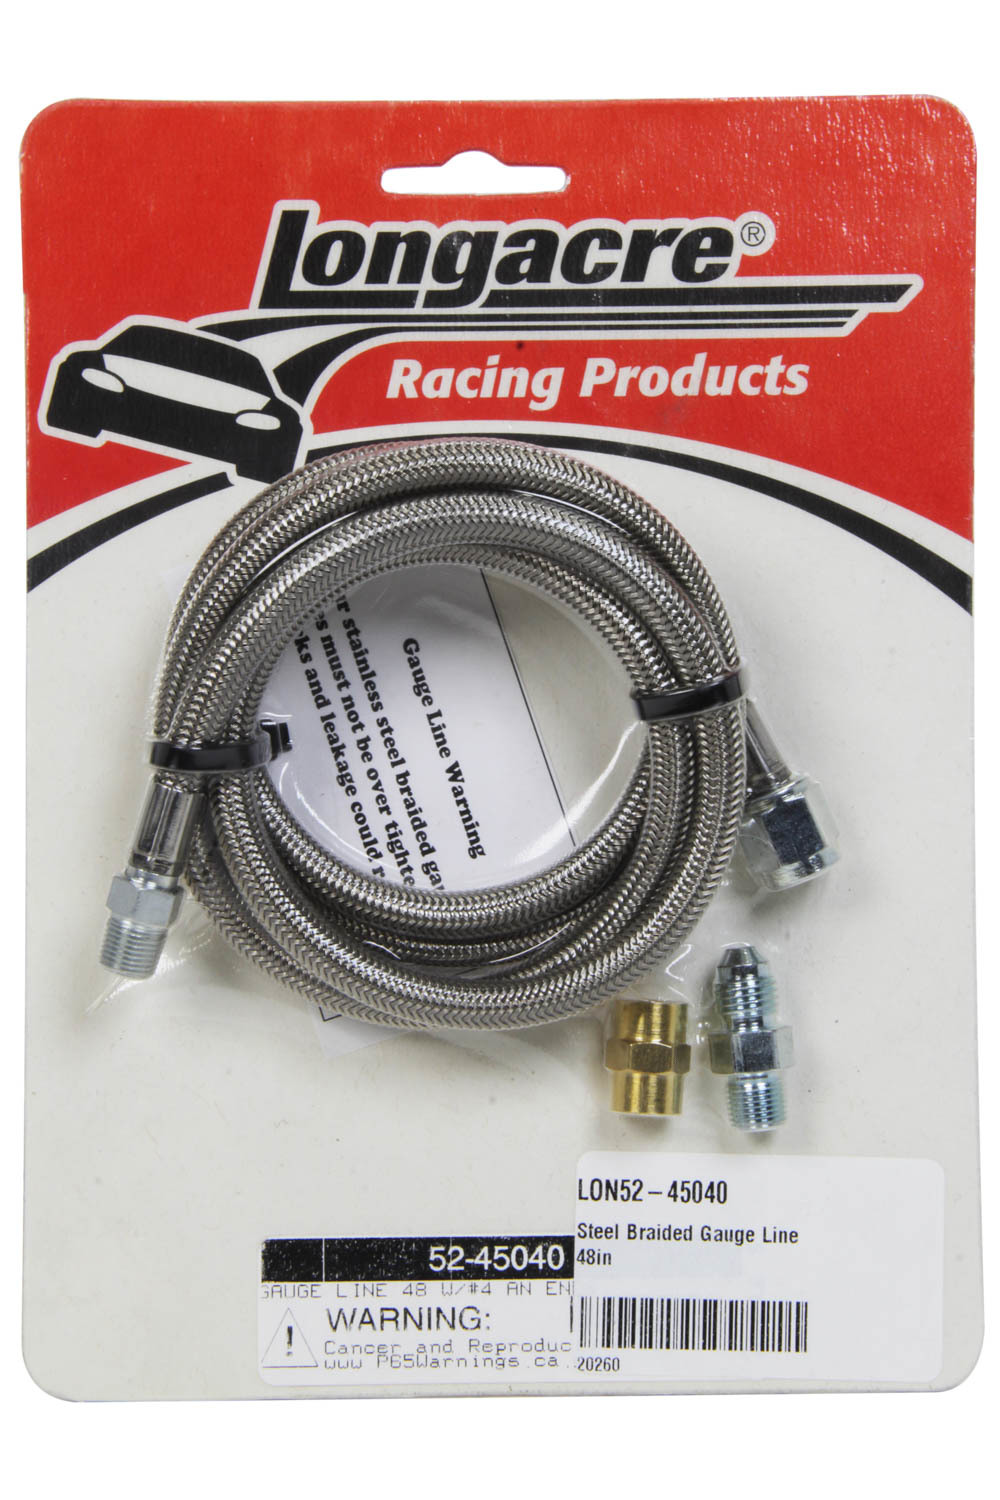 Longacre 52-45040 - Gauge Line Kit, 4 AN, 48 in Long, 4 AN Female to 1/8 in NPT Male, Fittings Included, PTFE, Braided Stainless, Mechanical Pressure Gauges, Kit